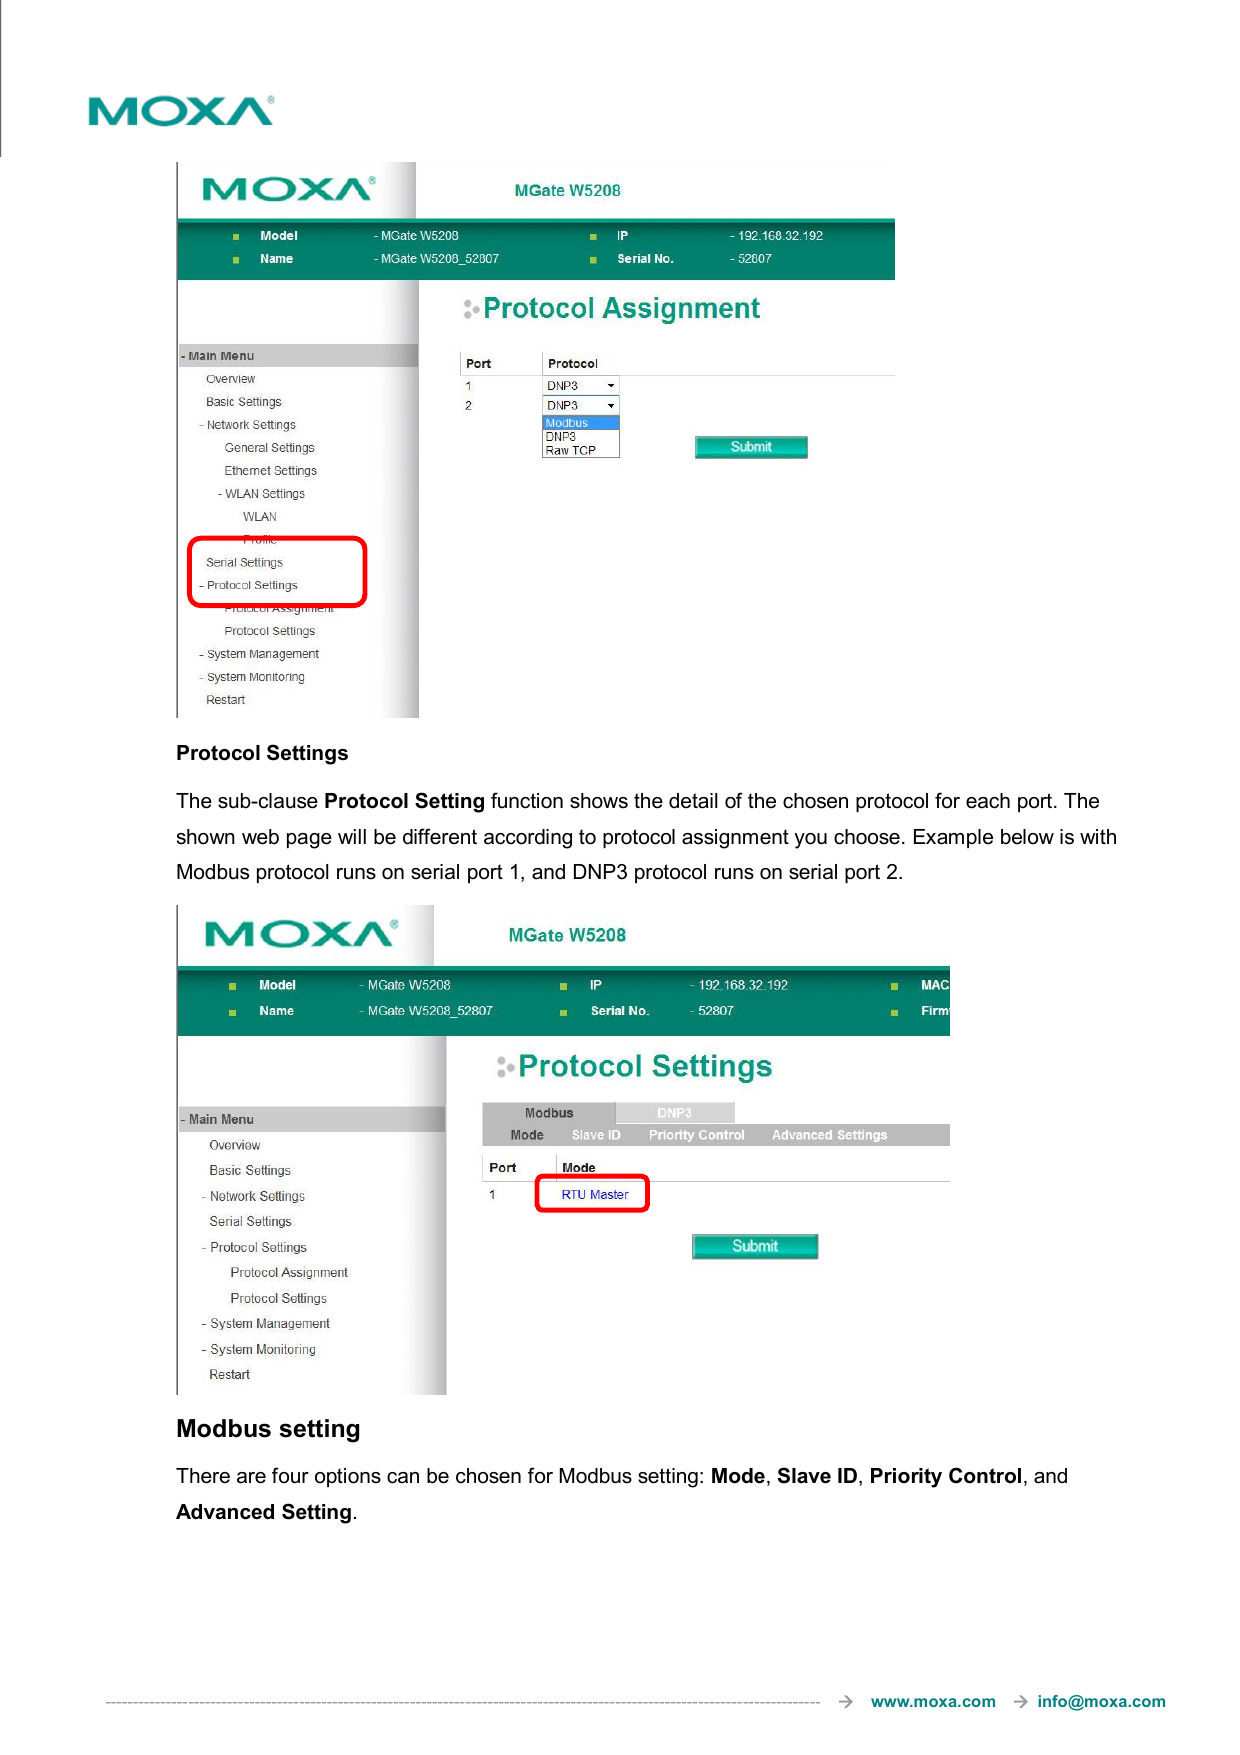  ---------------------------------------------------------------------------------------------------------------------------------       www.moxa.com     info@moxa.com   Protocol Settings The sub-clause Protocol Setting function shows the detail of the chosen protocol for each port. The shown web page will be different according to protocol assignment you choose. Example below is with Modbus protocol runs on serial port 1, and DNP3 protocol runs on serial port 2.    Modbus setting There are four options can be chosen for Modbus setting: Mode, Slave ID, Priority Control, and Advanced Setting.      